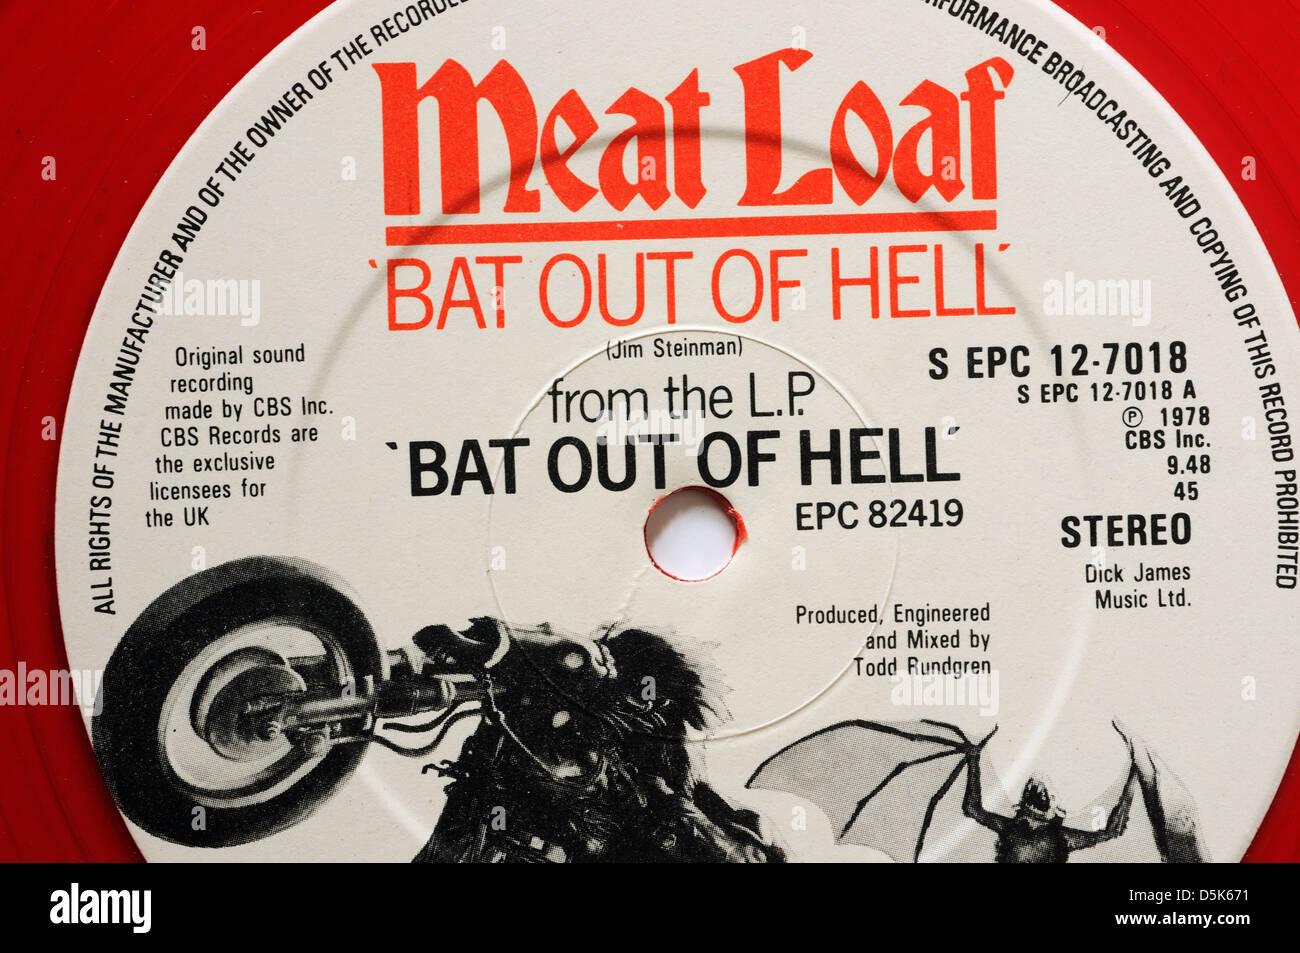 Meat Loaf-Bat out of Hell 12' einzelne Stockfoto